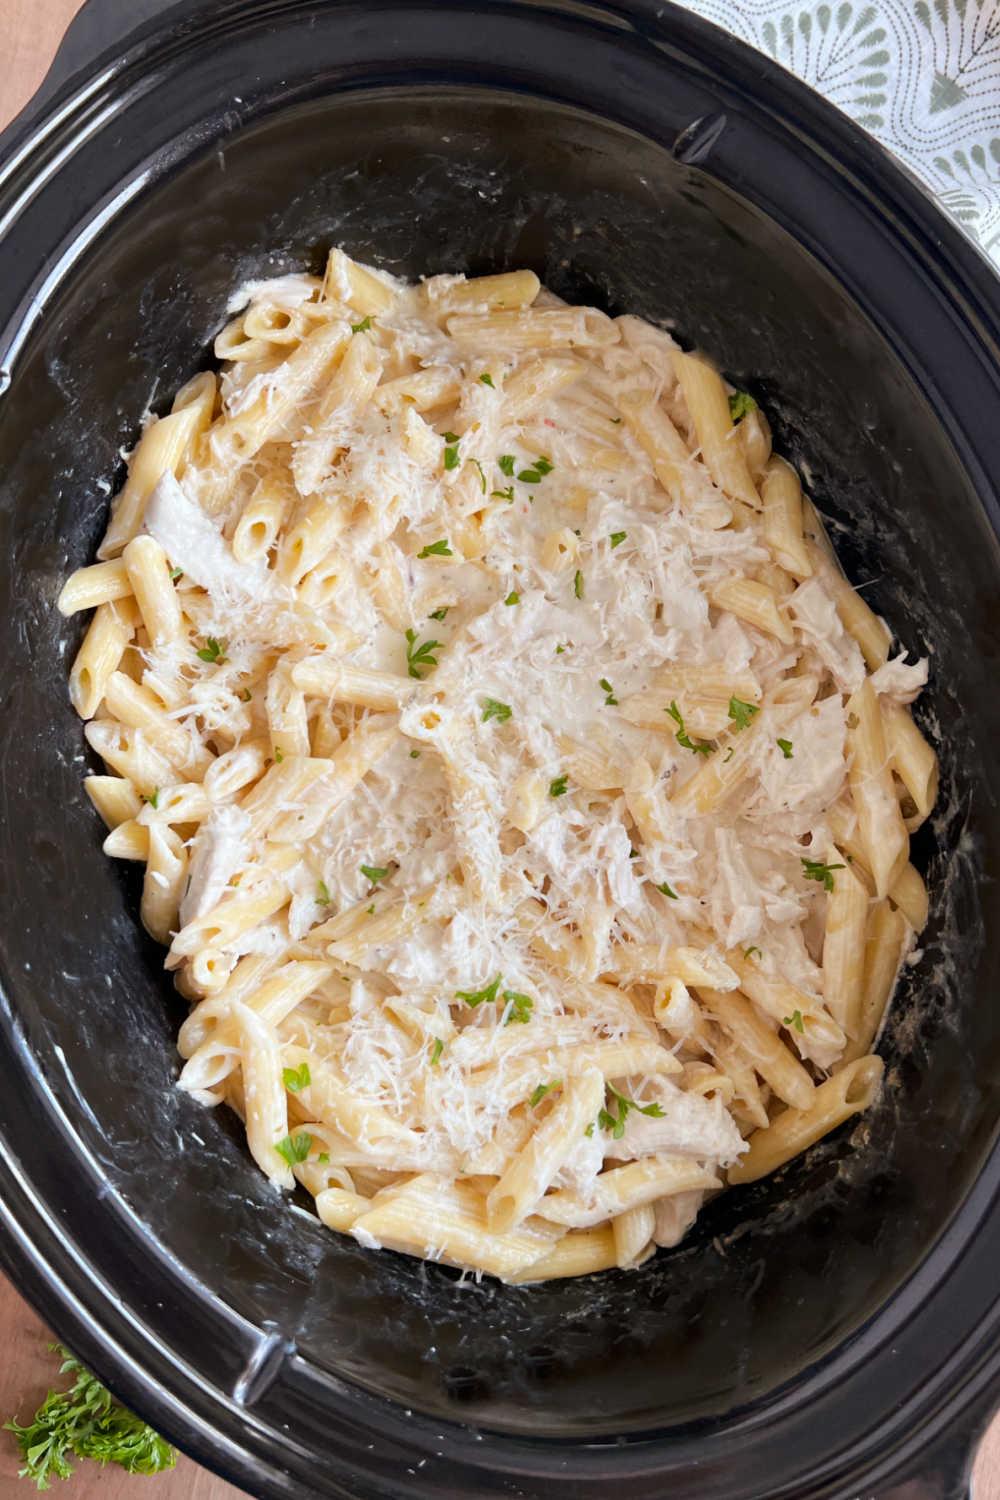 olive garden crockpot chicken pasta with parsley in slow cooker.